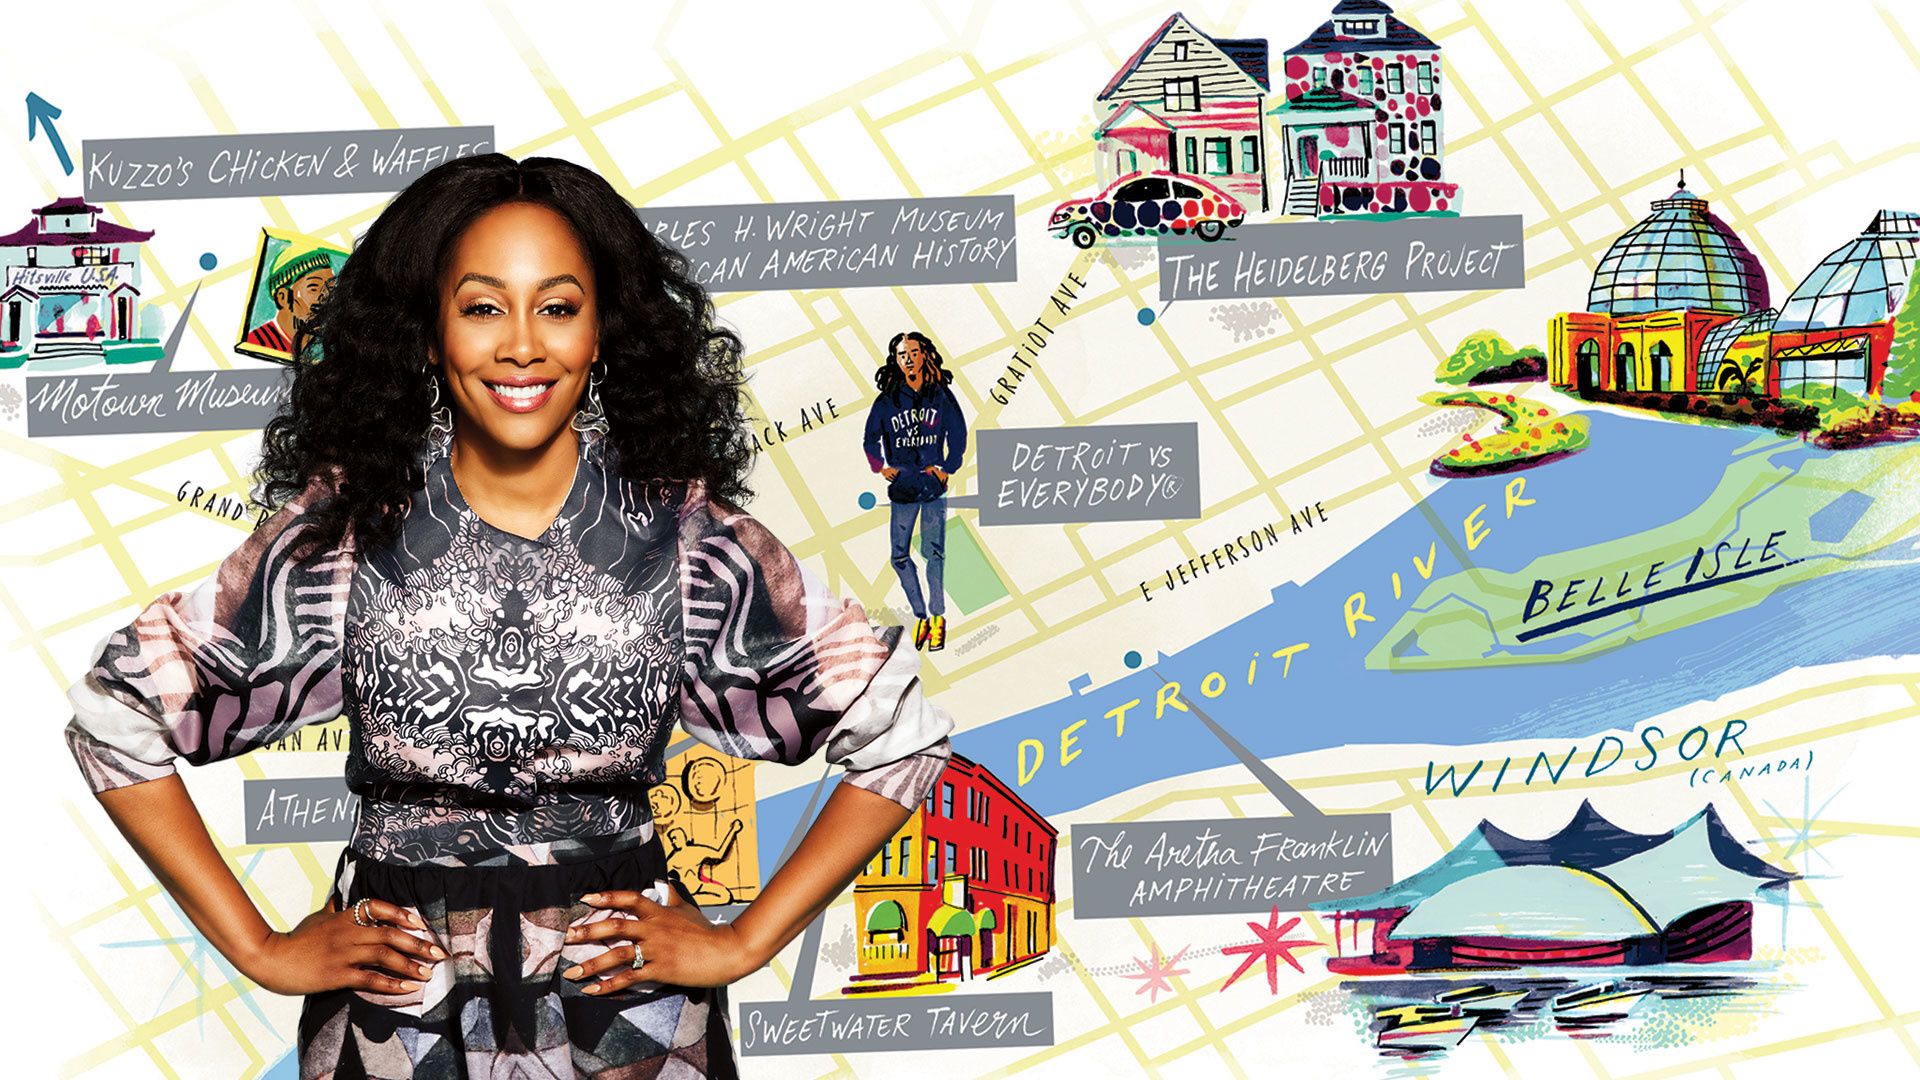 Composite image of Simone Missick in front of illustrated map of Detroit.